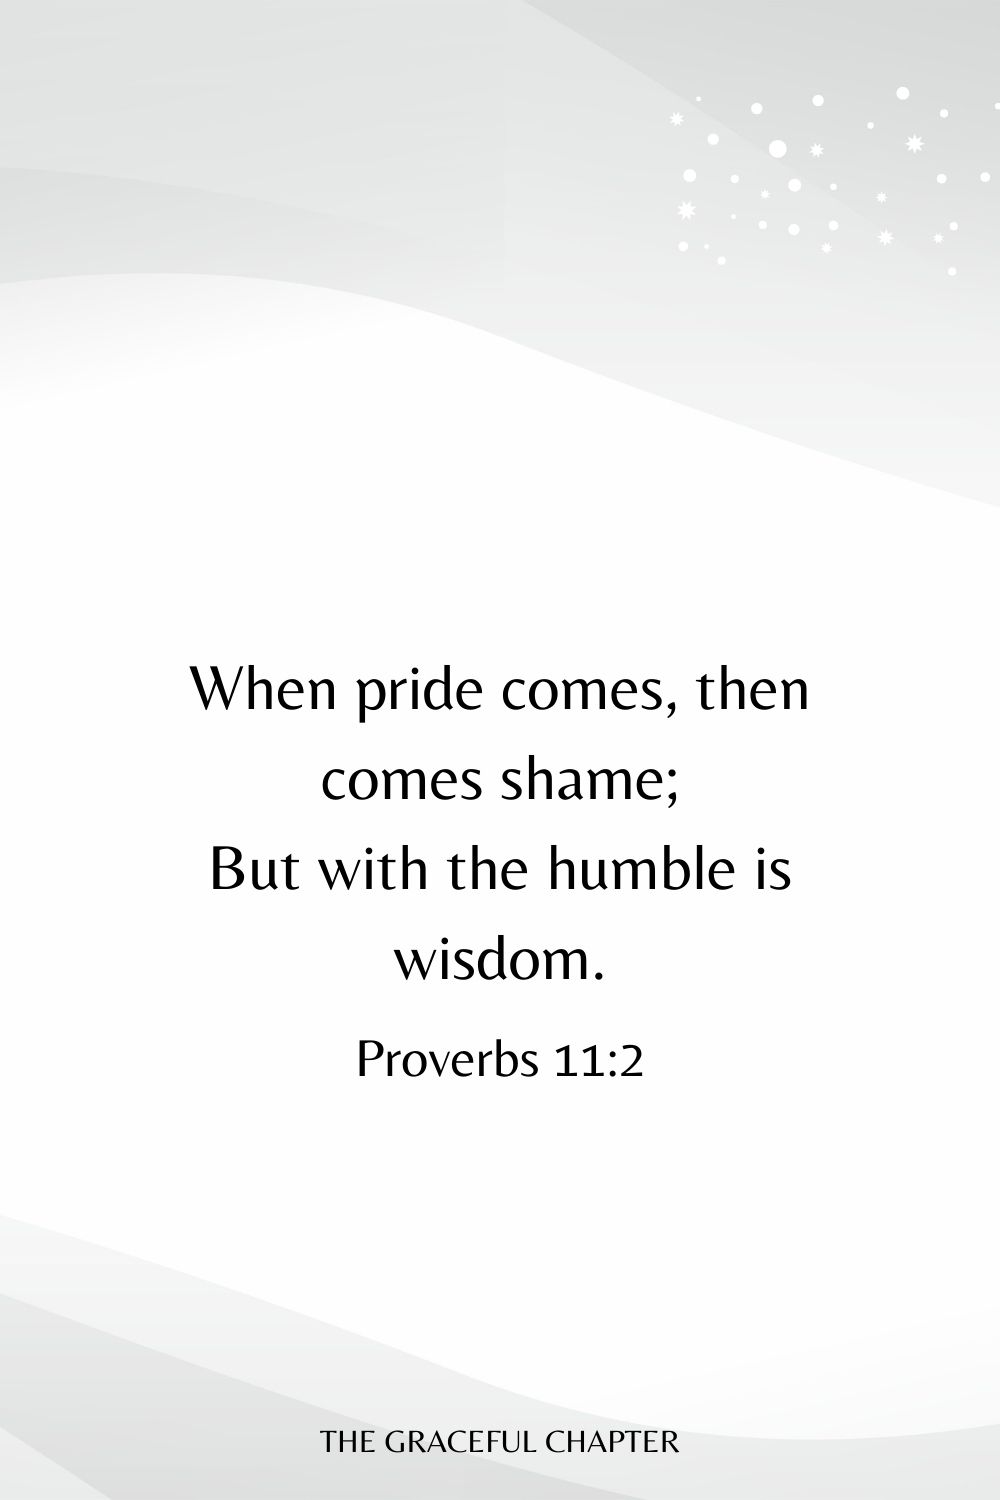 When pride comes, then comes shame; But with the humble is wisdom. Proverbs 11:2